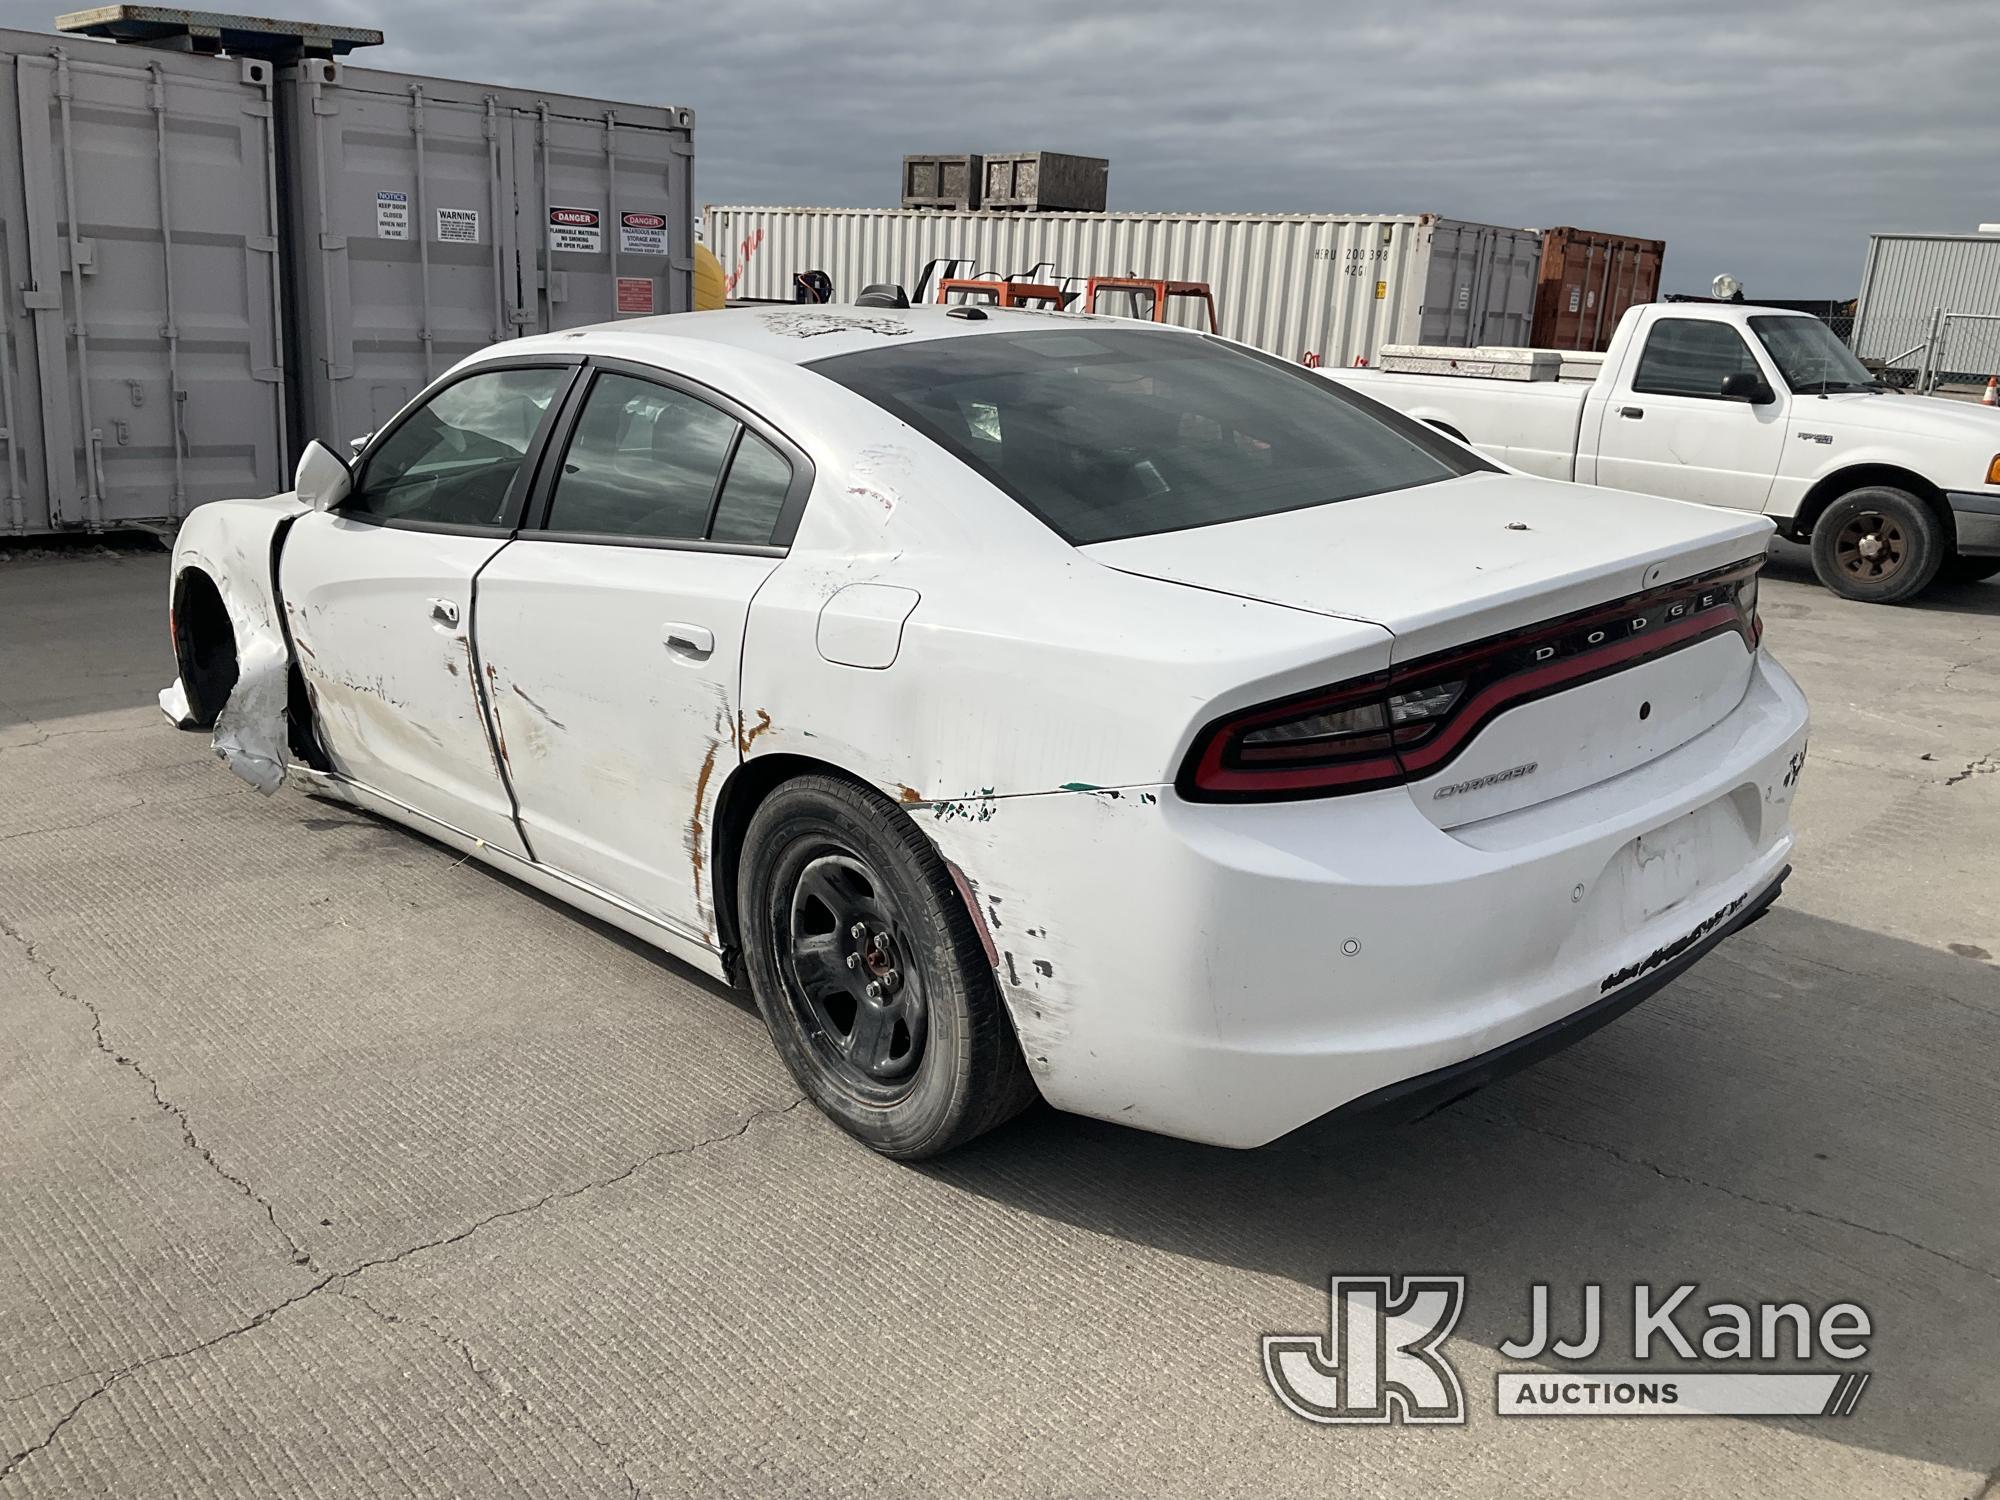 (Dixon, CA) 2021 Dodge Charger 4-Door Sedan Runs, Does Not Move) (Wrecked. Airbags Deployed.